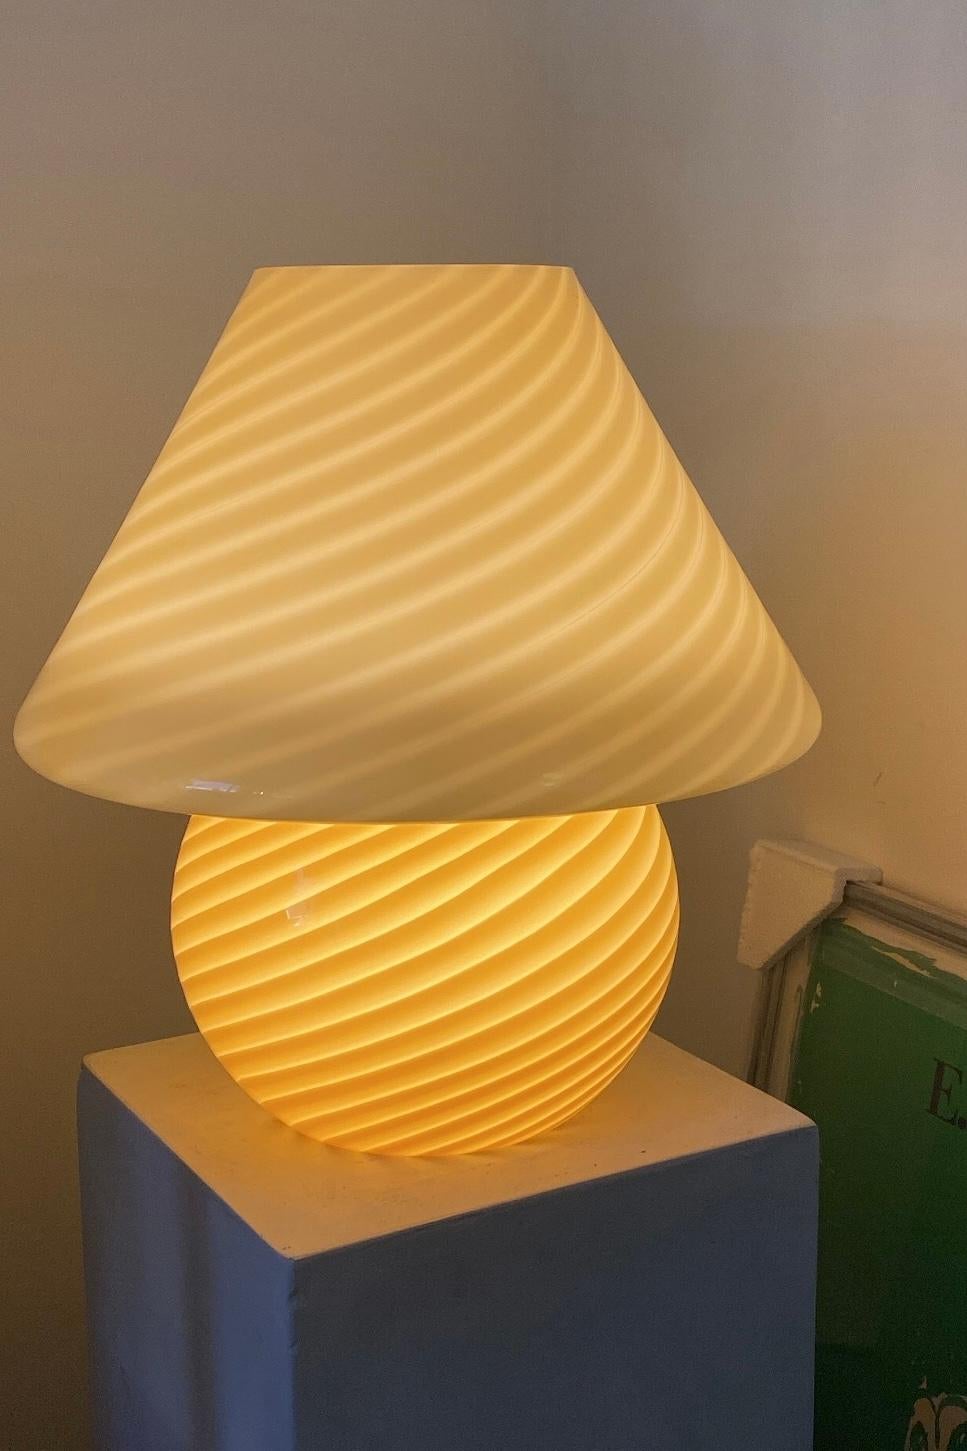 Extra large vintage Murano mushroom table lamp in a very nice sunny yellow shade. Mouth-blown in one piece of glass with a swirl pattern. Handmade in Italy, 1960s-1970s, and comes with new white cord.
Measures: ?H: 38 cm D: 34 cm?